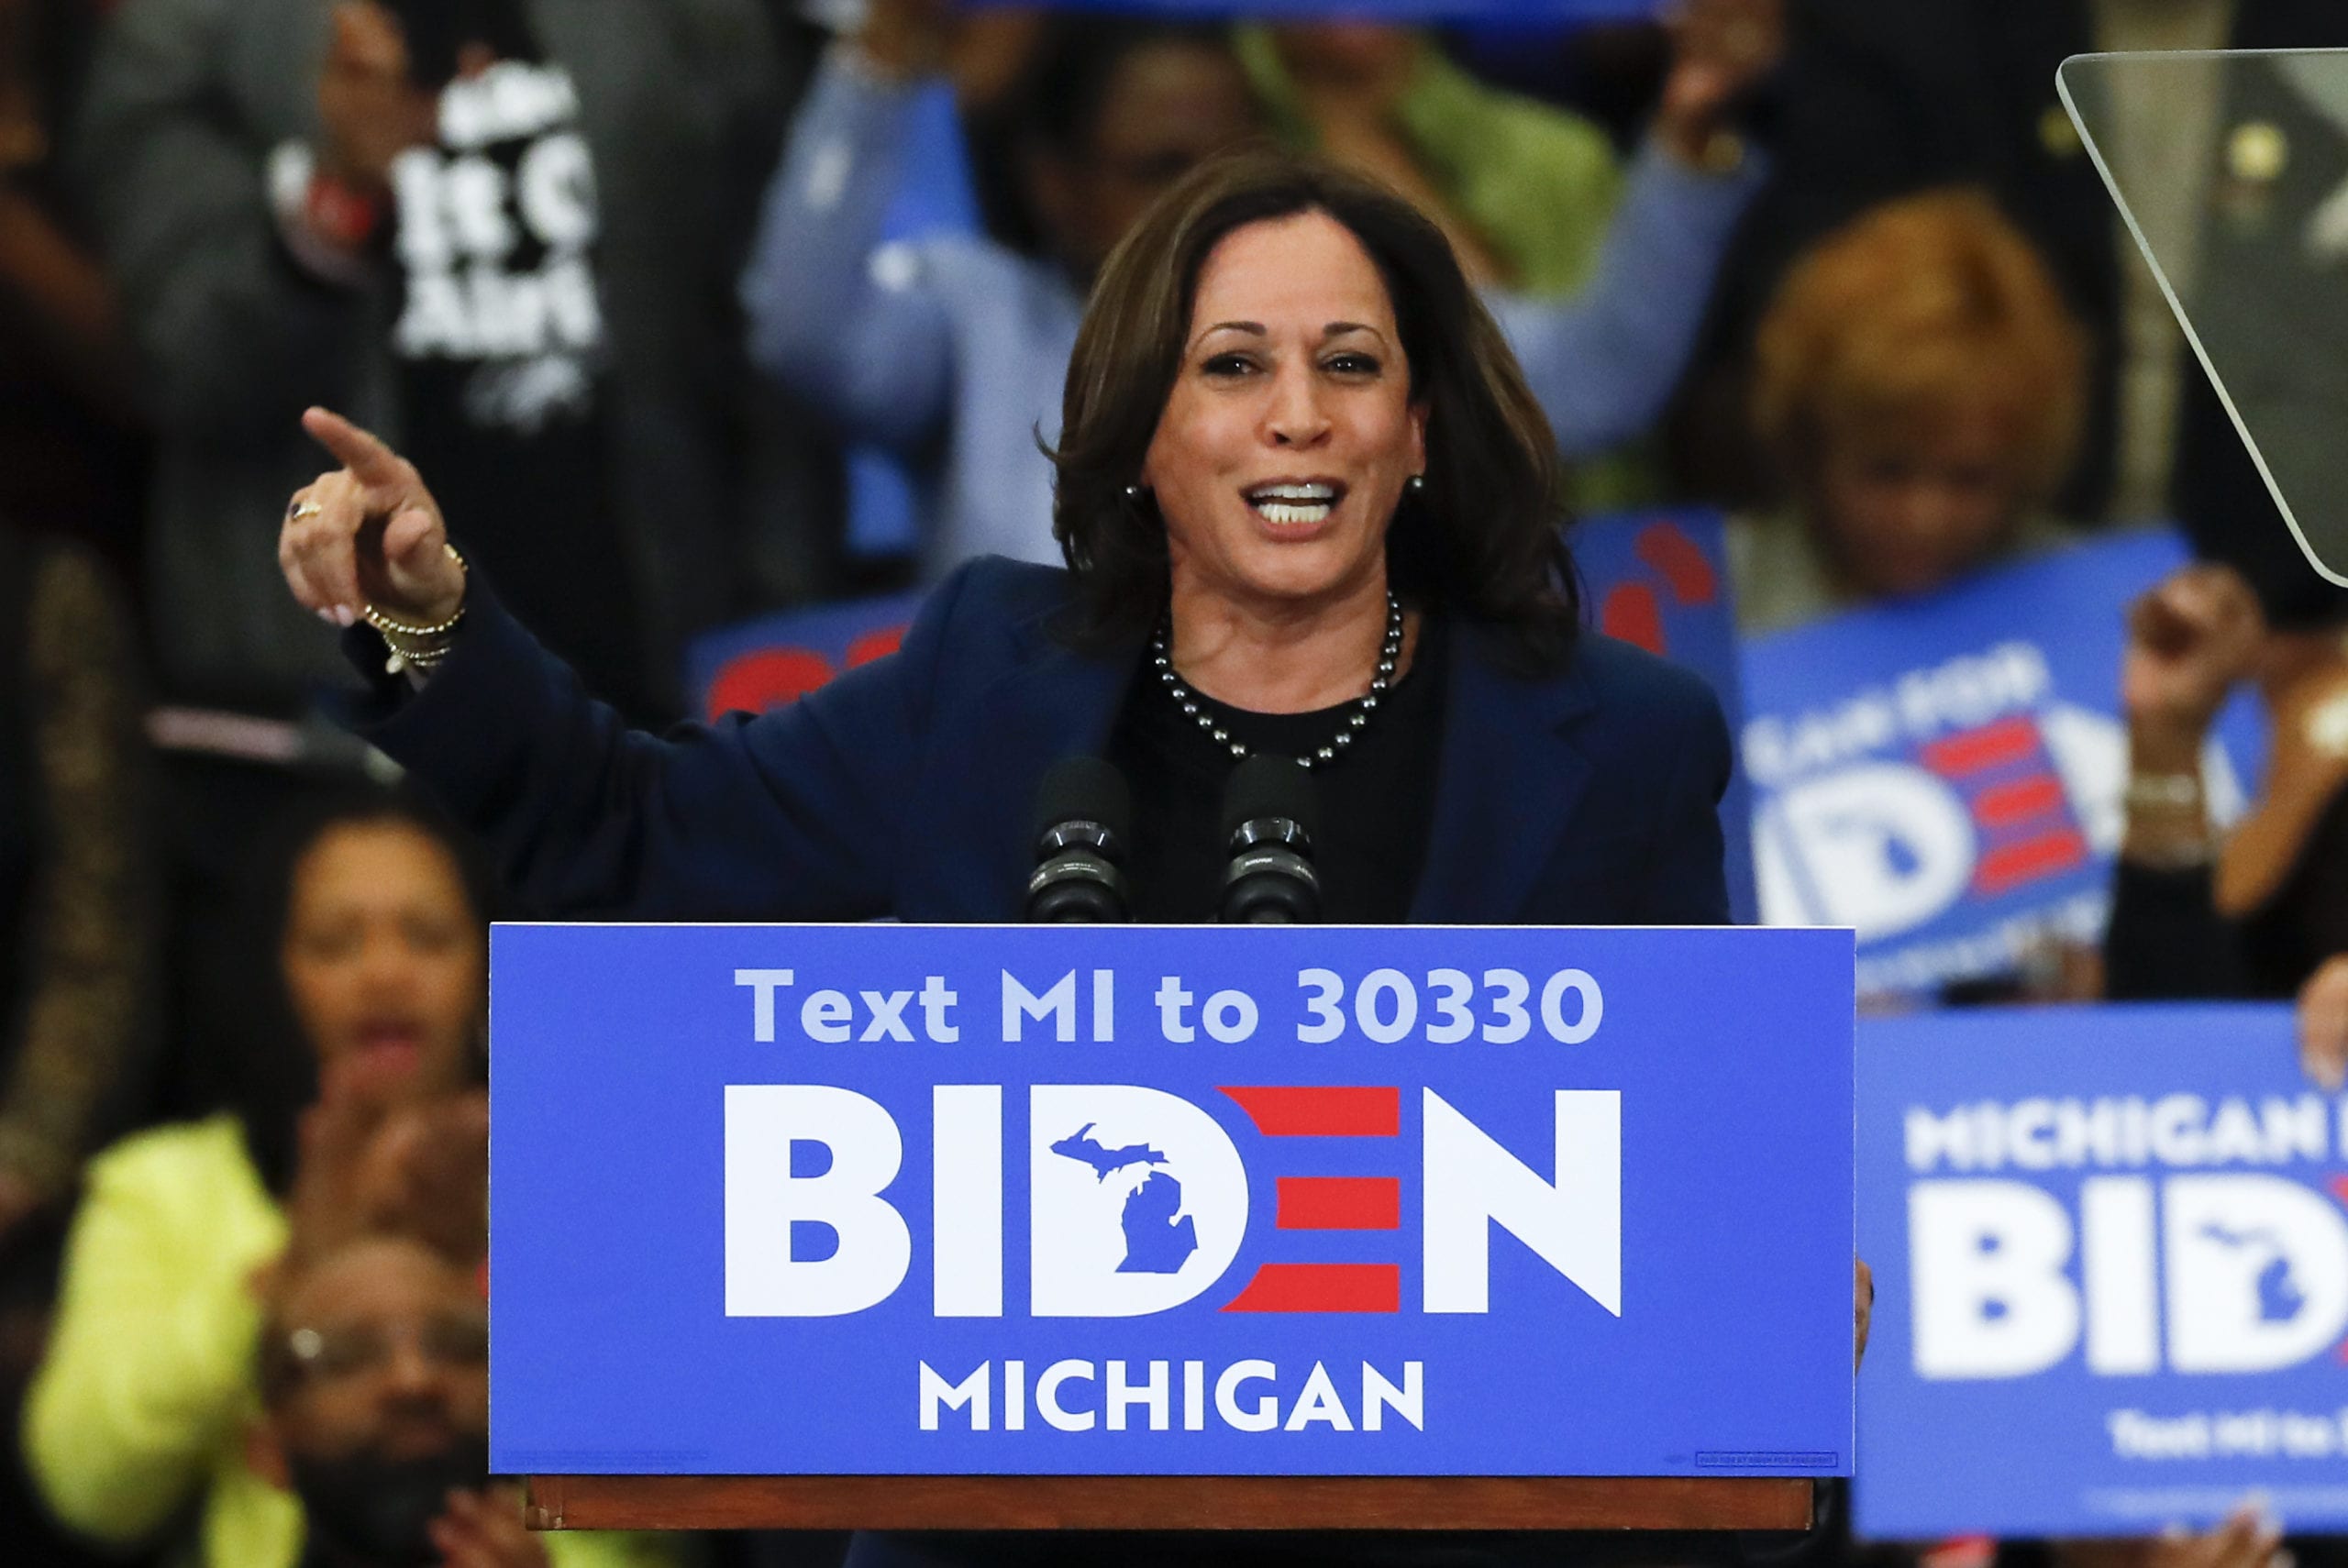 Sen. Kamala Harris, D-Calif., speaks at a campaign rally for Democratic presidential candidate former Vice President Joe Biden at Renaissance High School in Detroit, Monday, March 9, 2020.